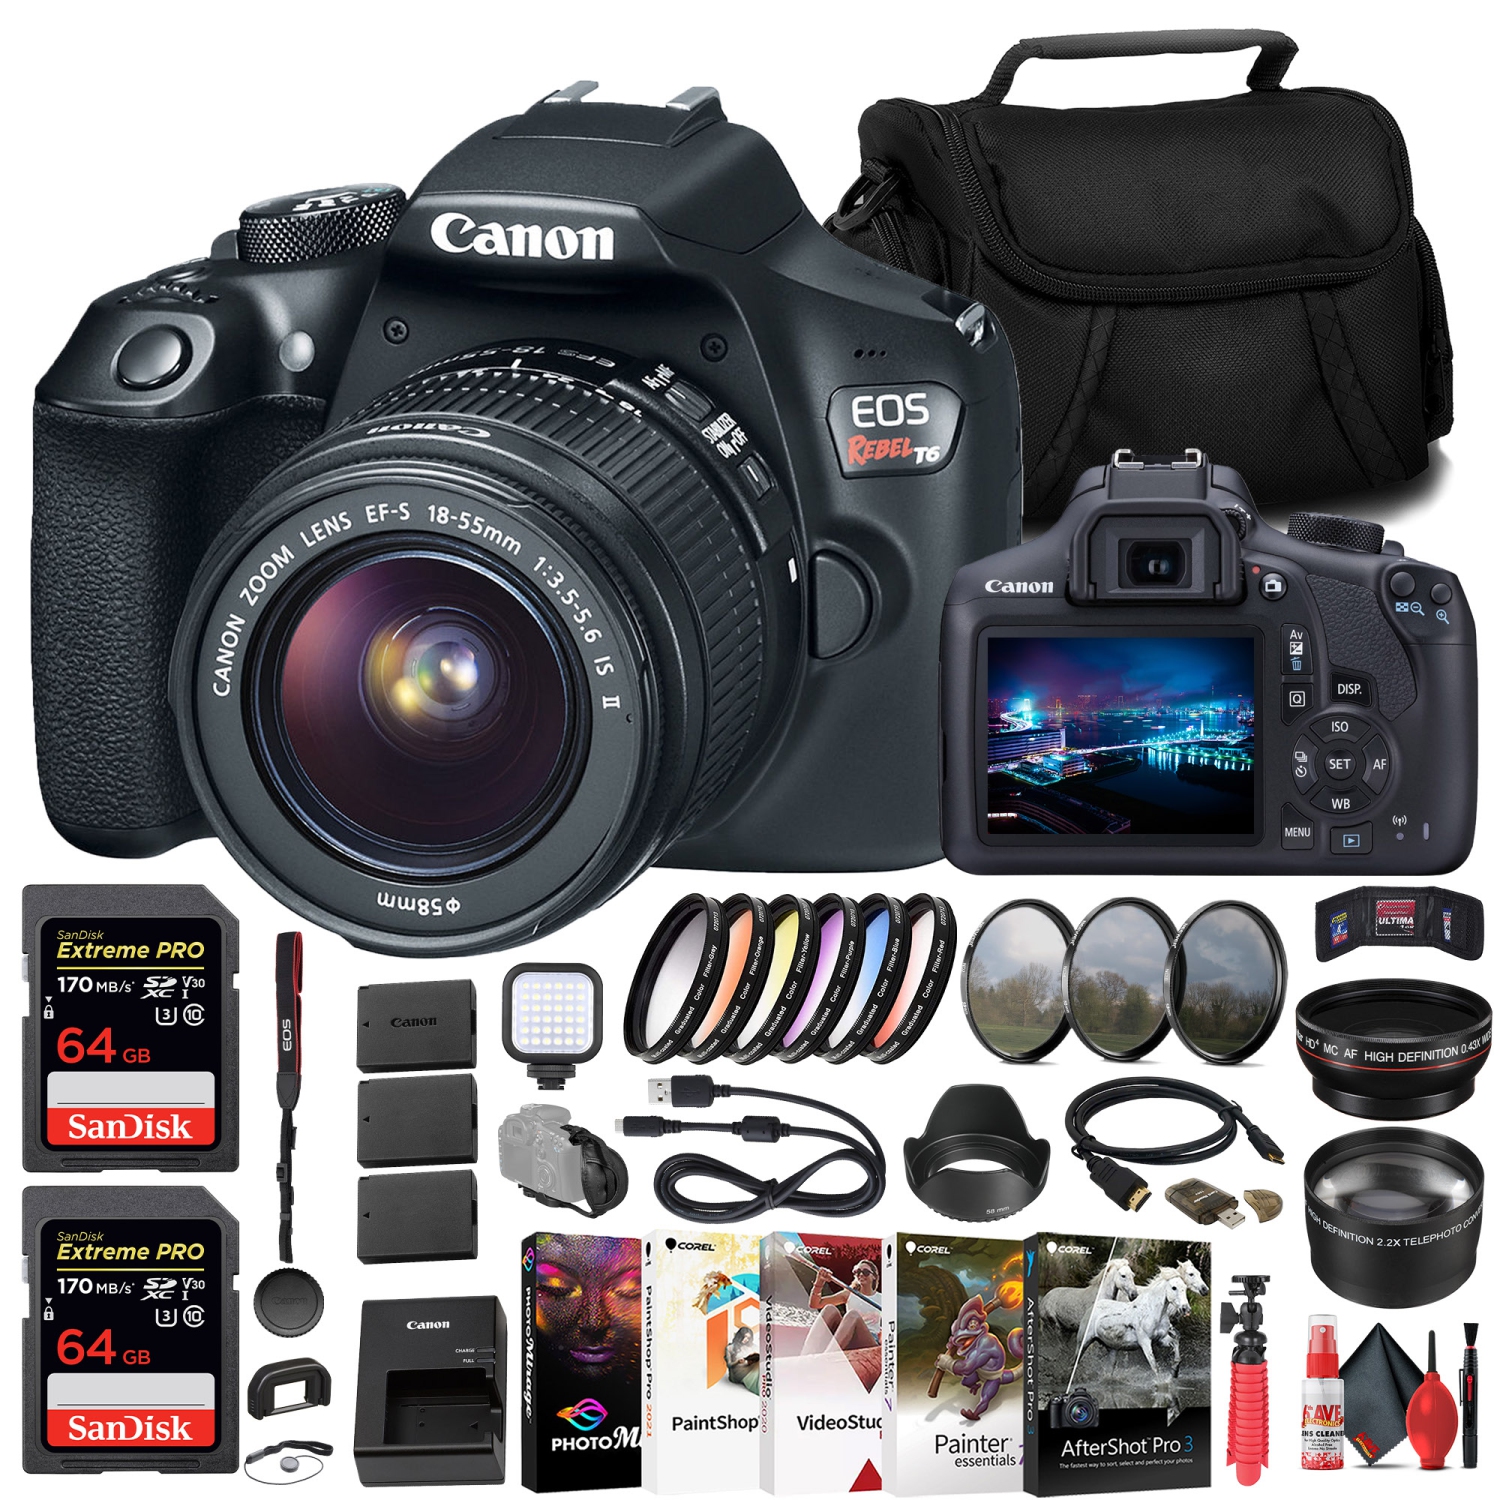 Canon EOS Rebel T6 DSLR Camera W/ 18-55mm Lens + 2 x 64GB Card + Filter + More